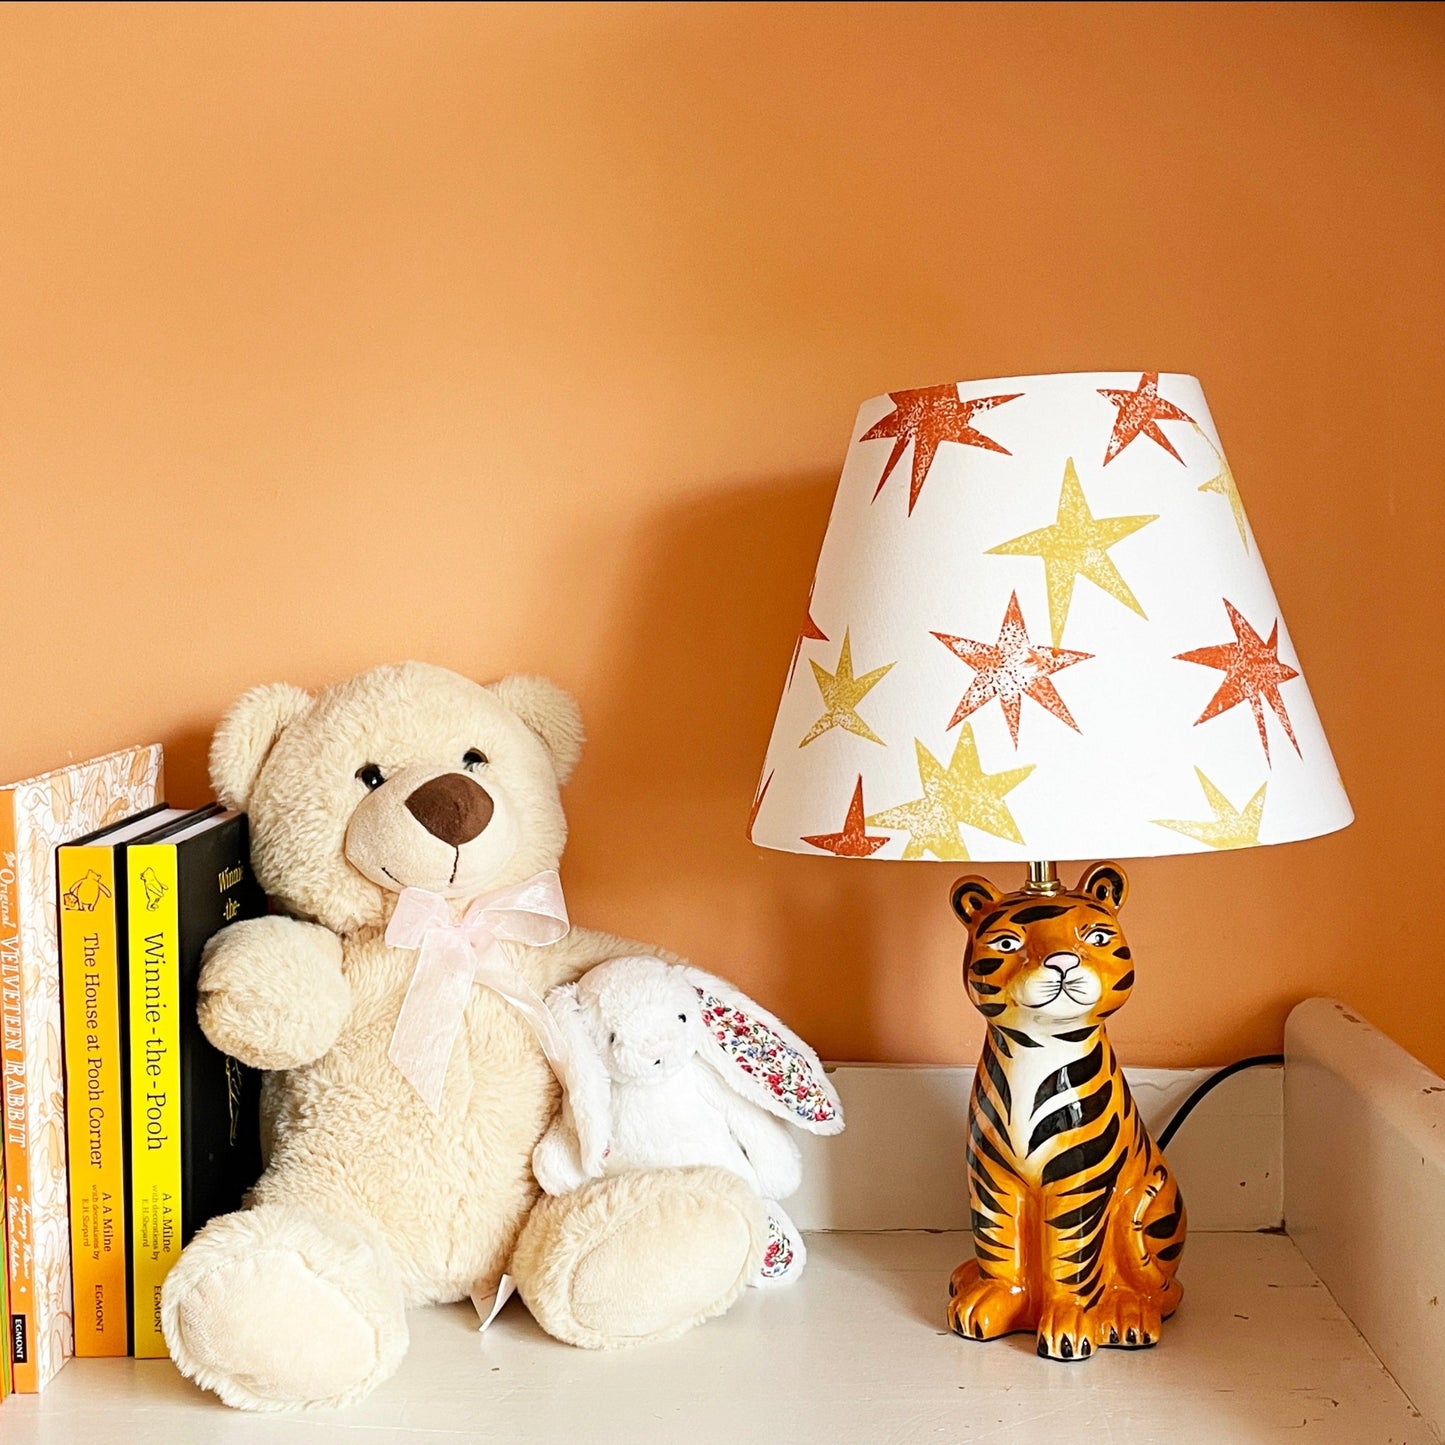 Yellow and orange lampshade on tiger lamp in children's bedroom